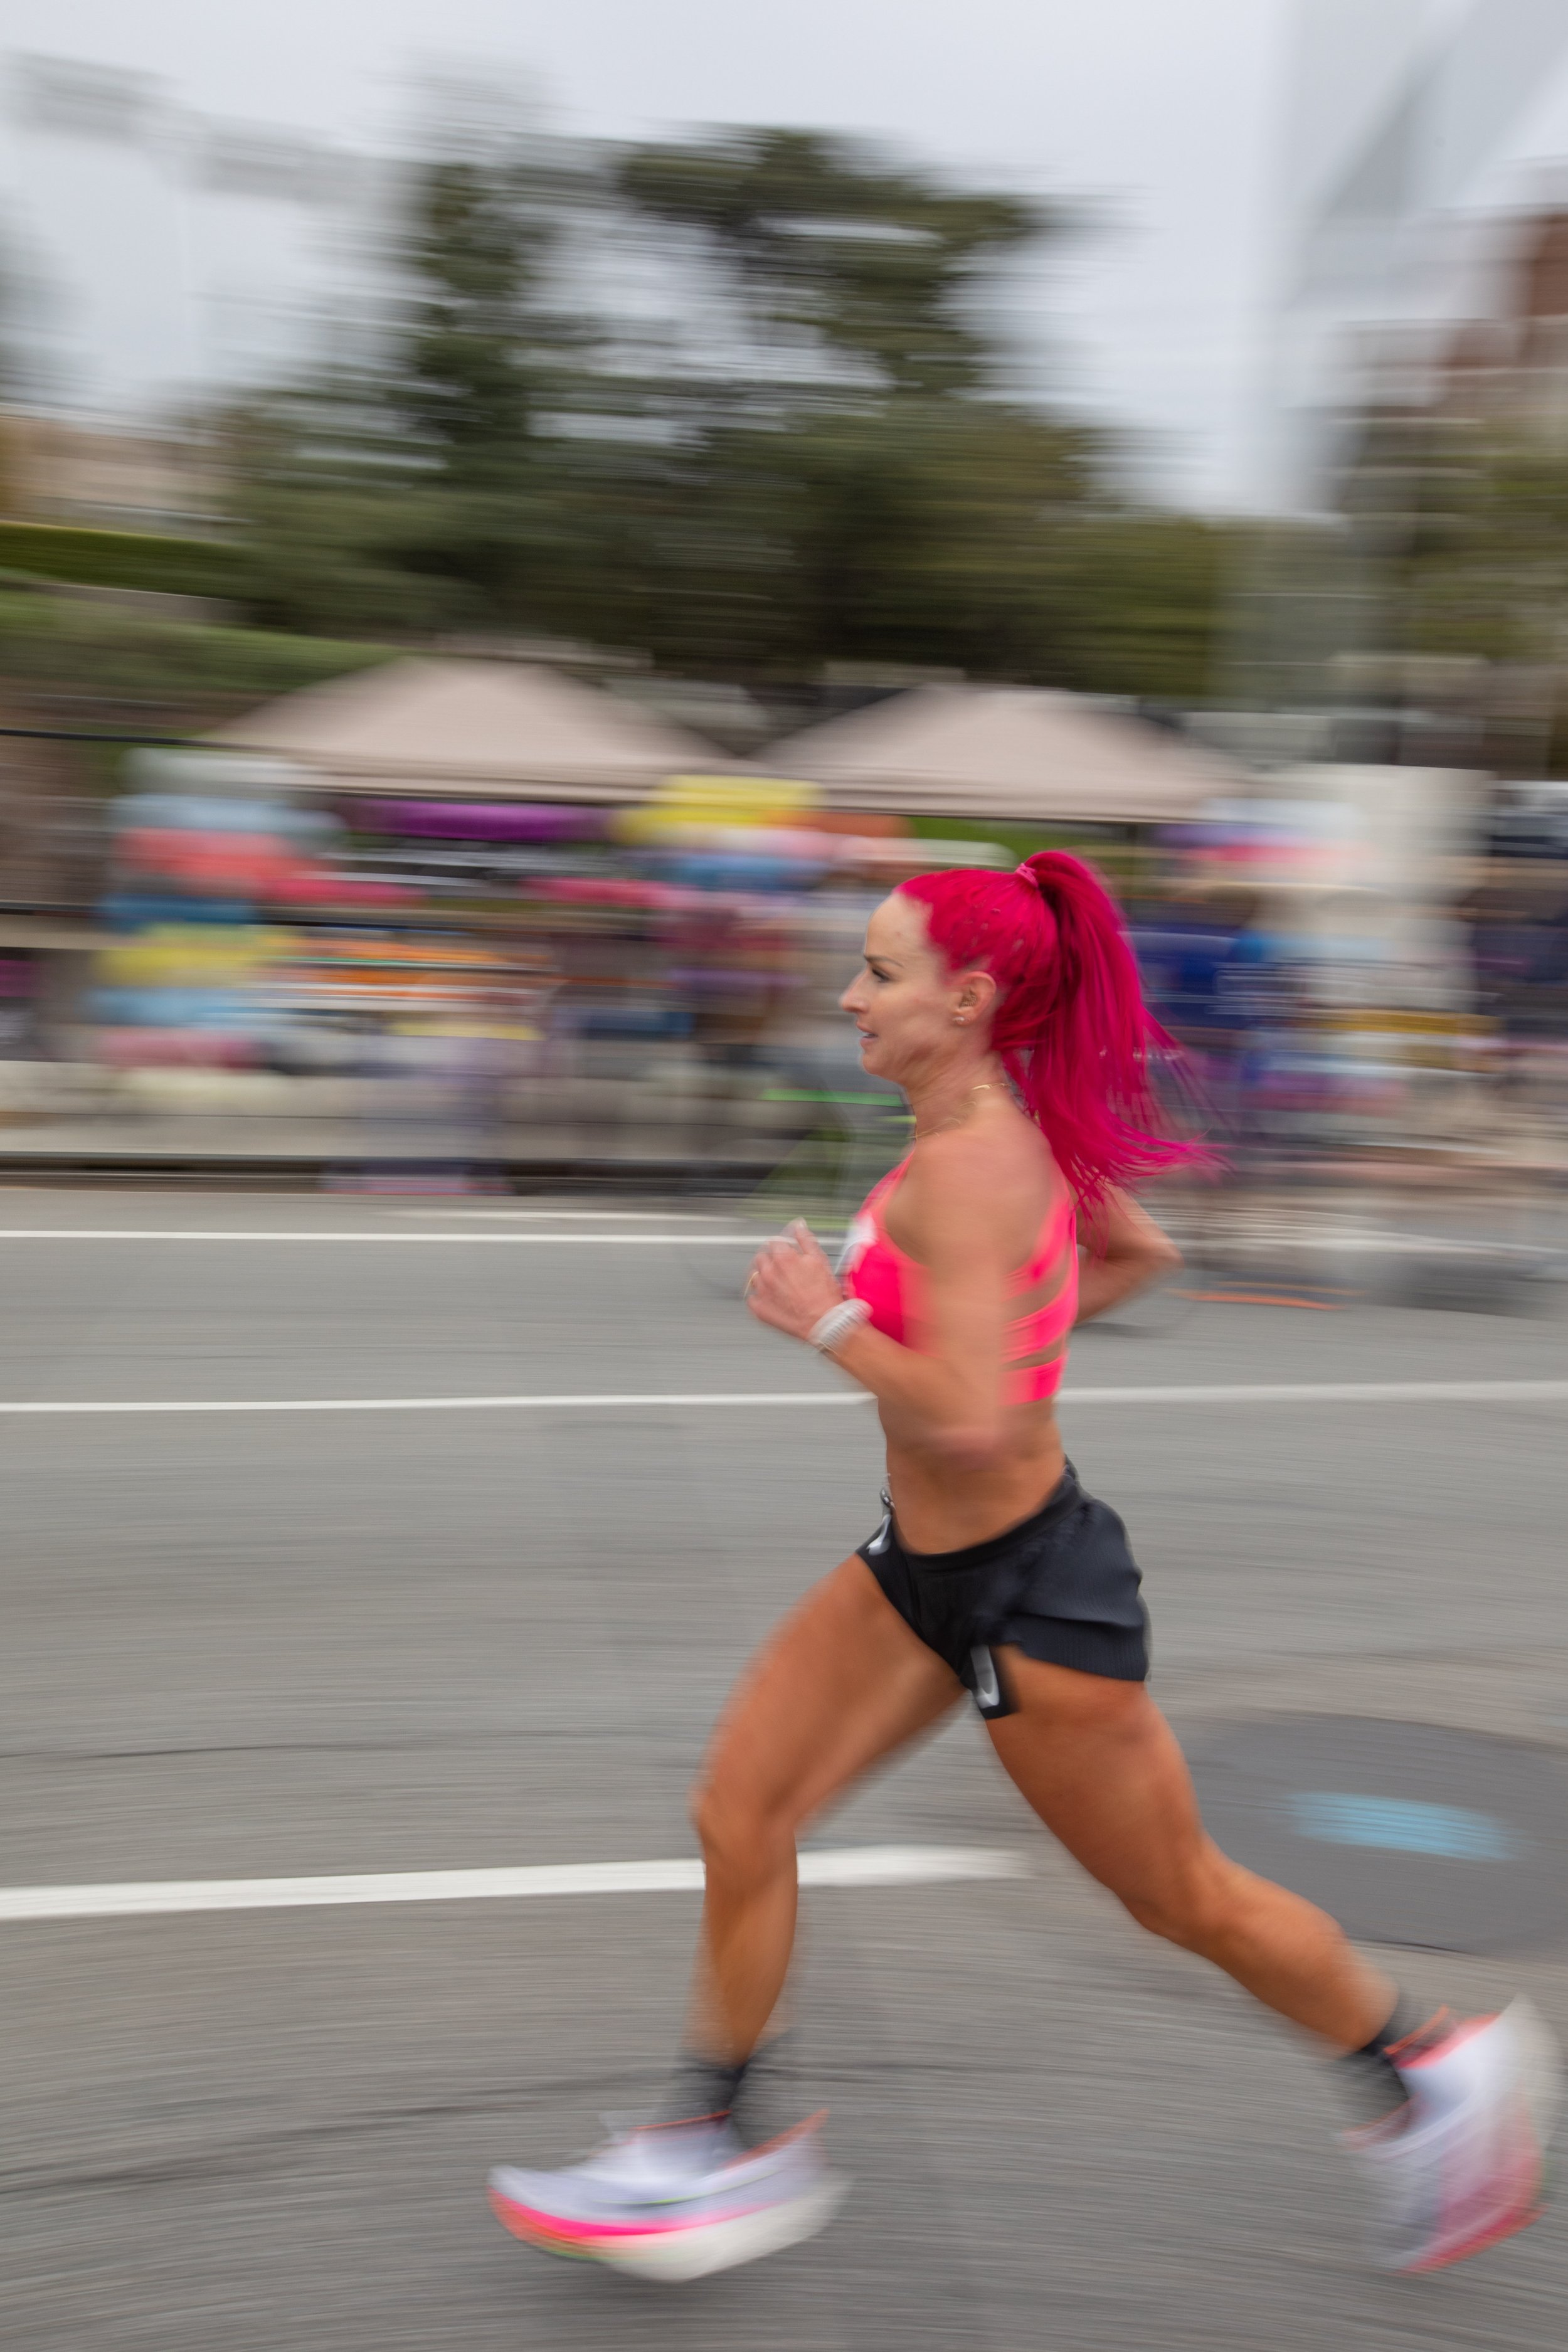  American Ashley Poulson from Mendon, Utah running on Santa Monica Blvd. heading West just passing through cheers on mile 19 during the L.A. Marathon 2023. Poulson placed in fourth behind the three female Kenyans that got into top positions. Sunday, 